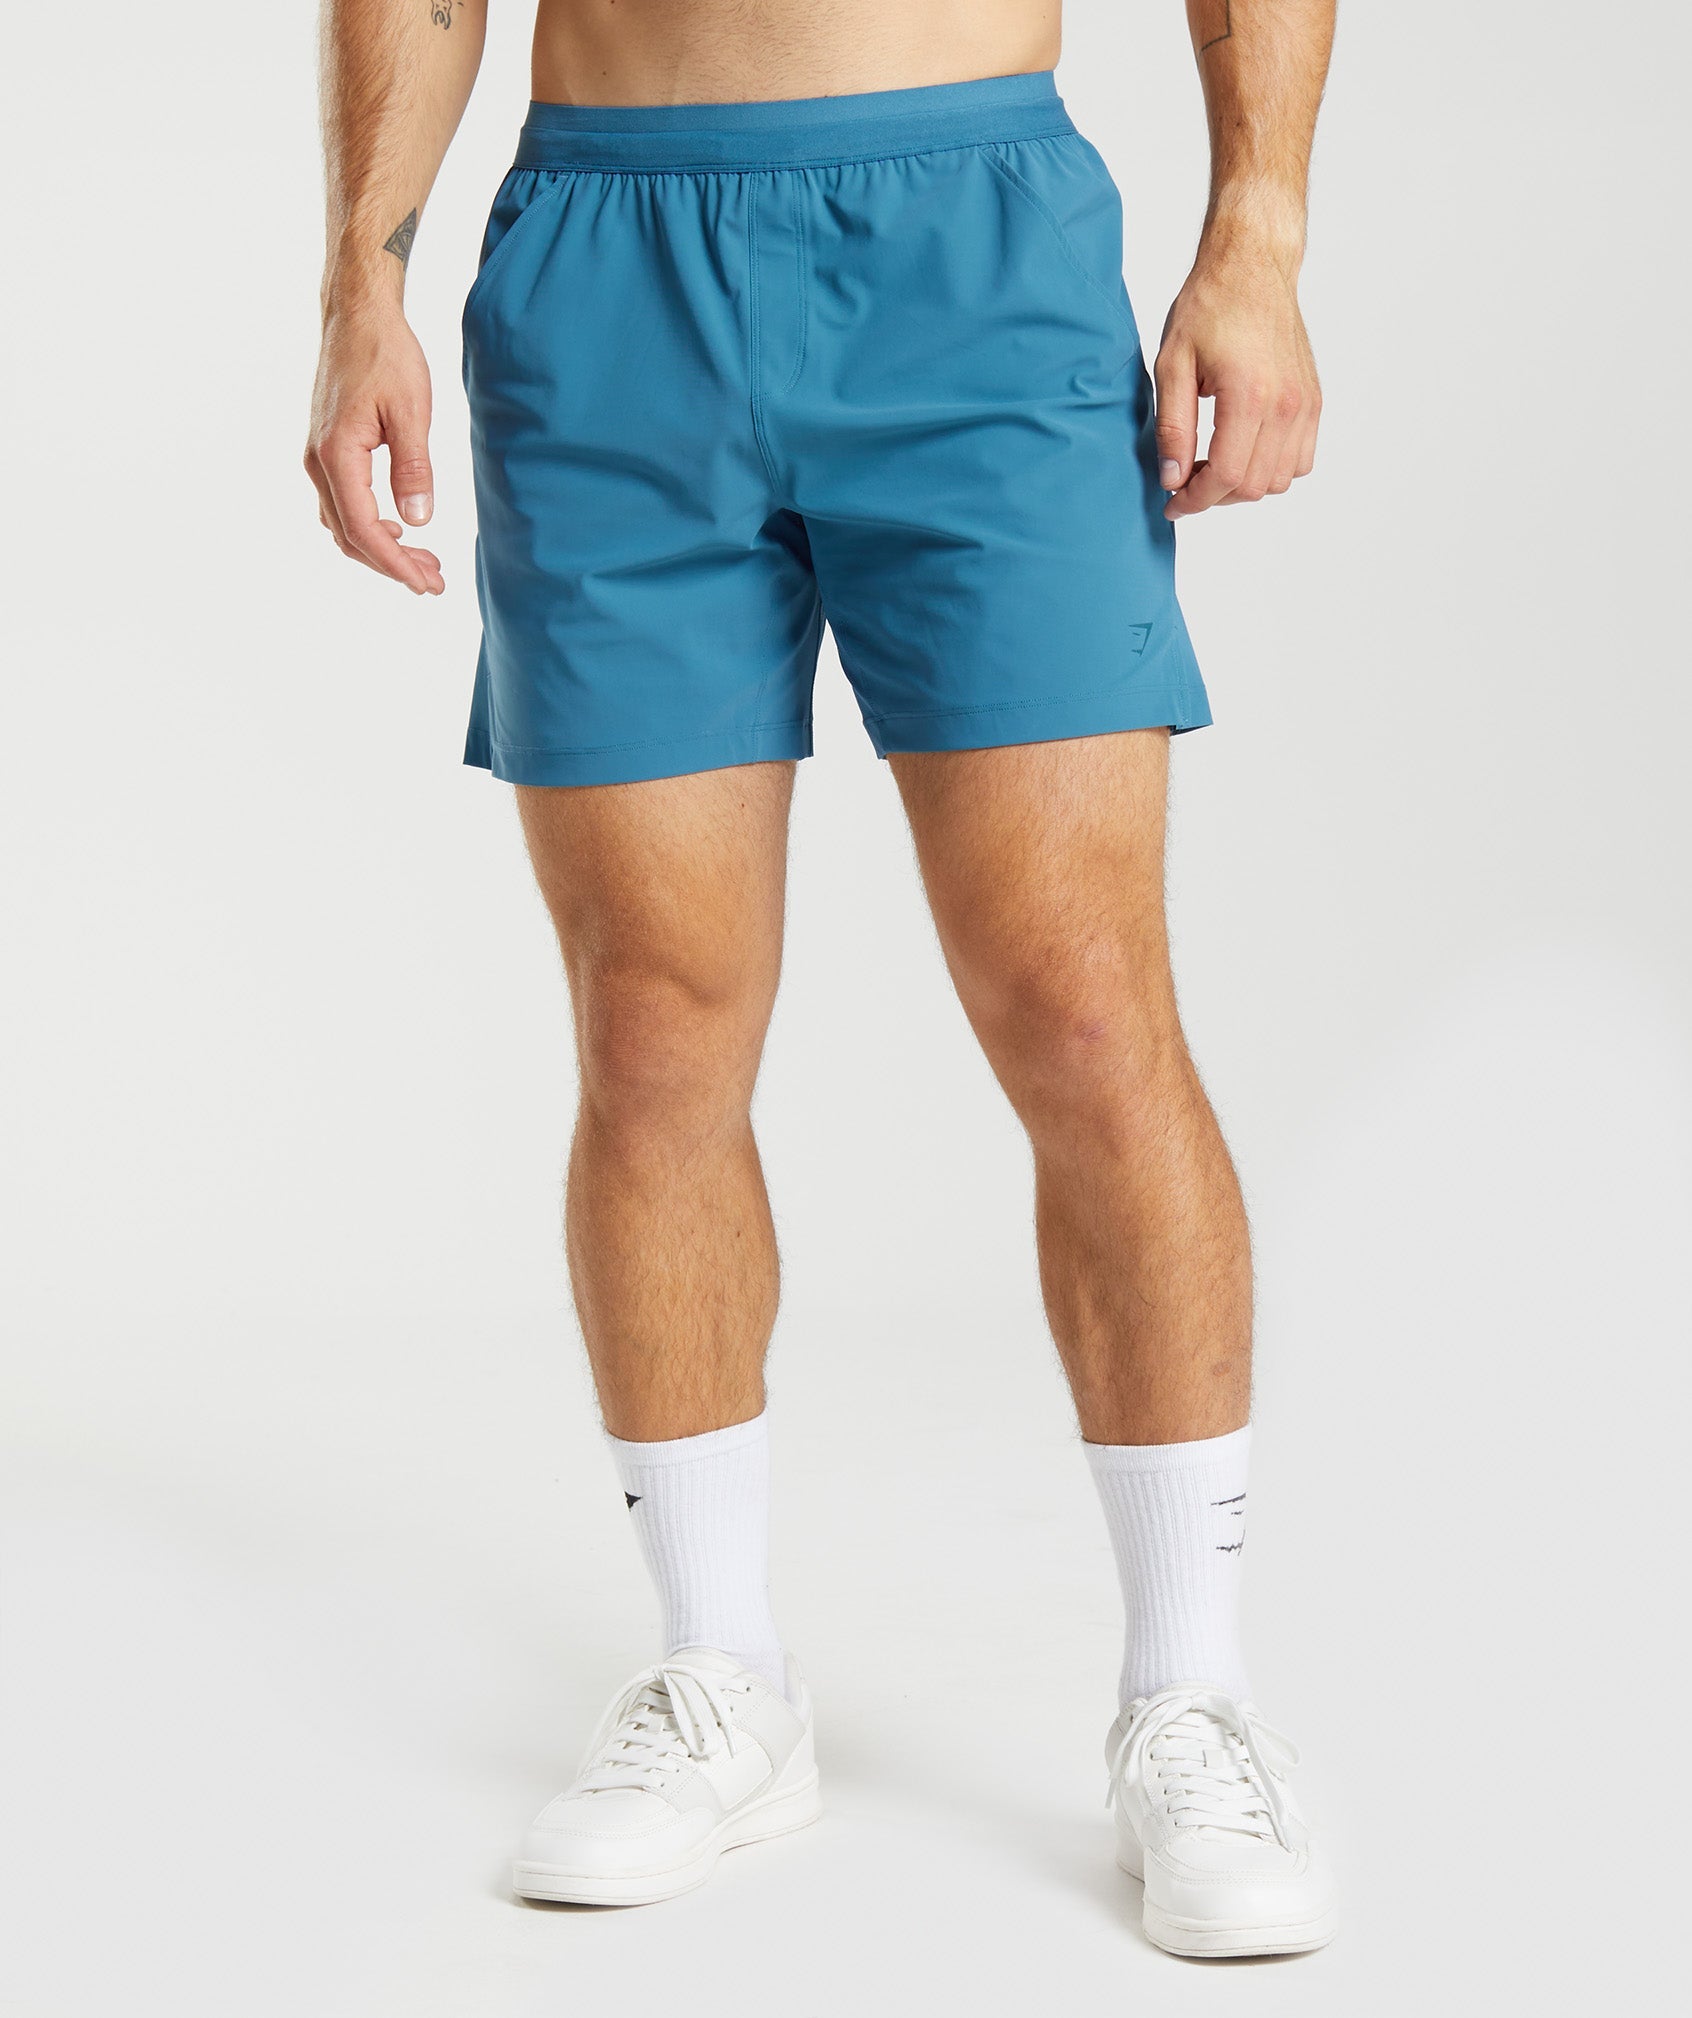 Studio Shorts in Lakeside Blue - view 1